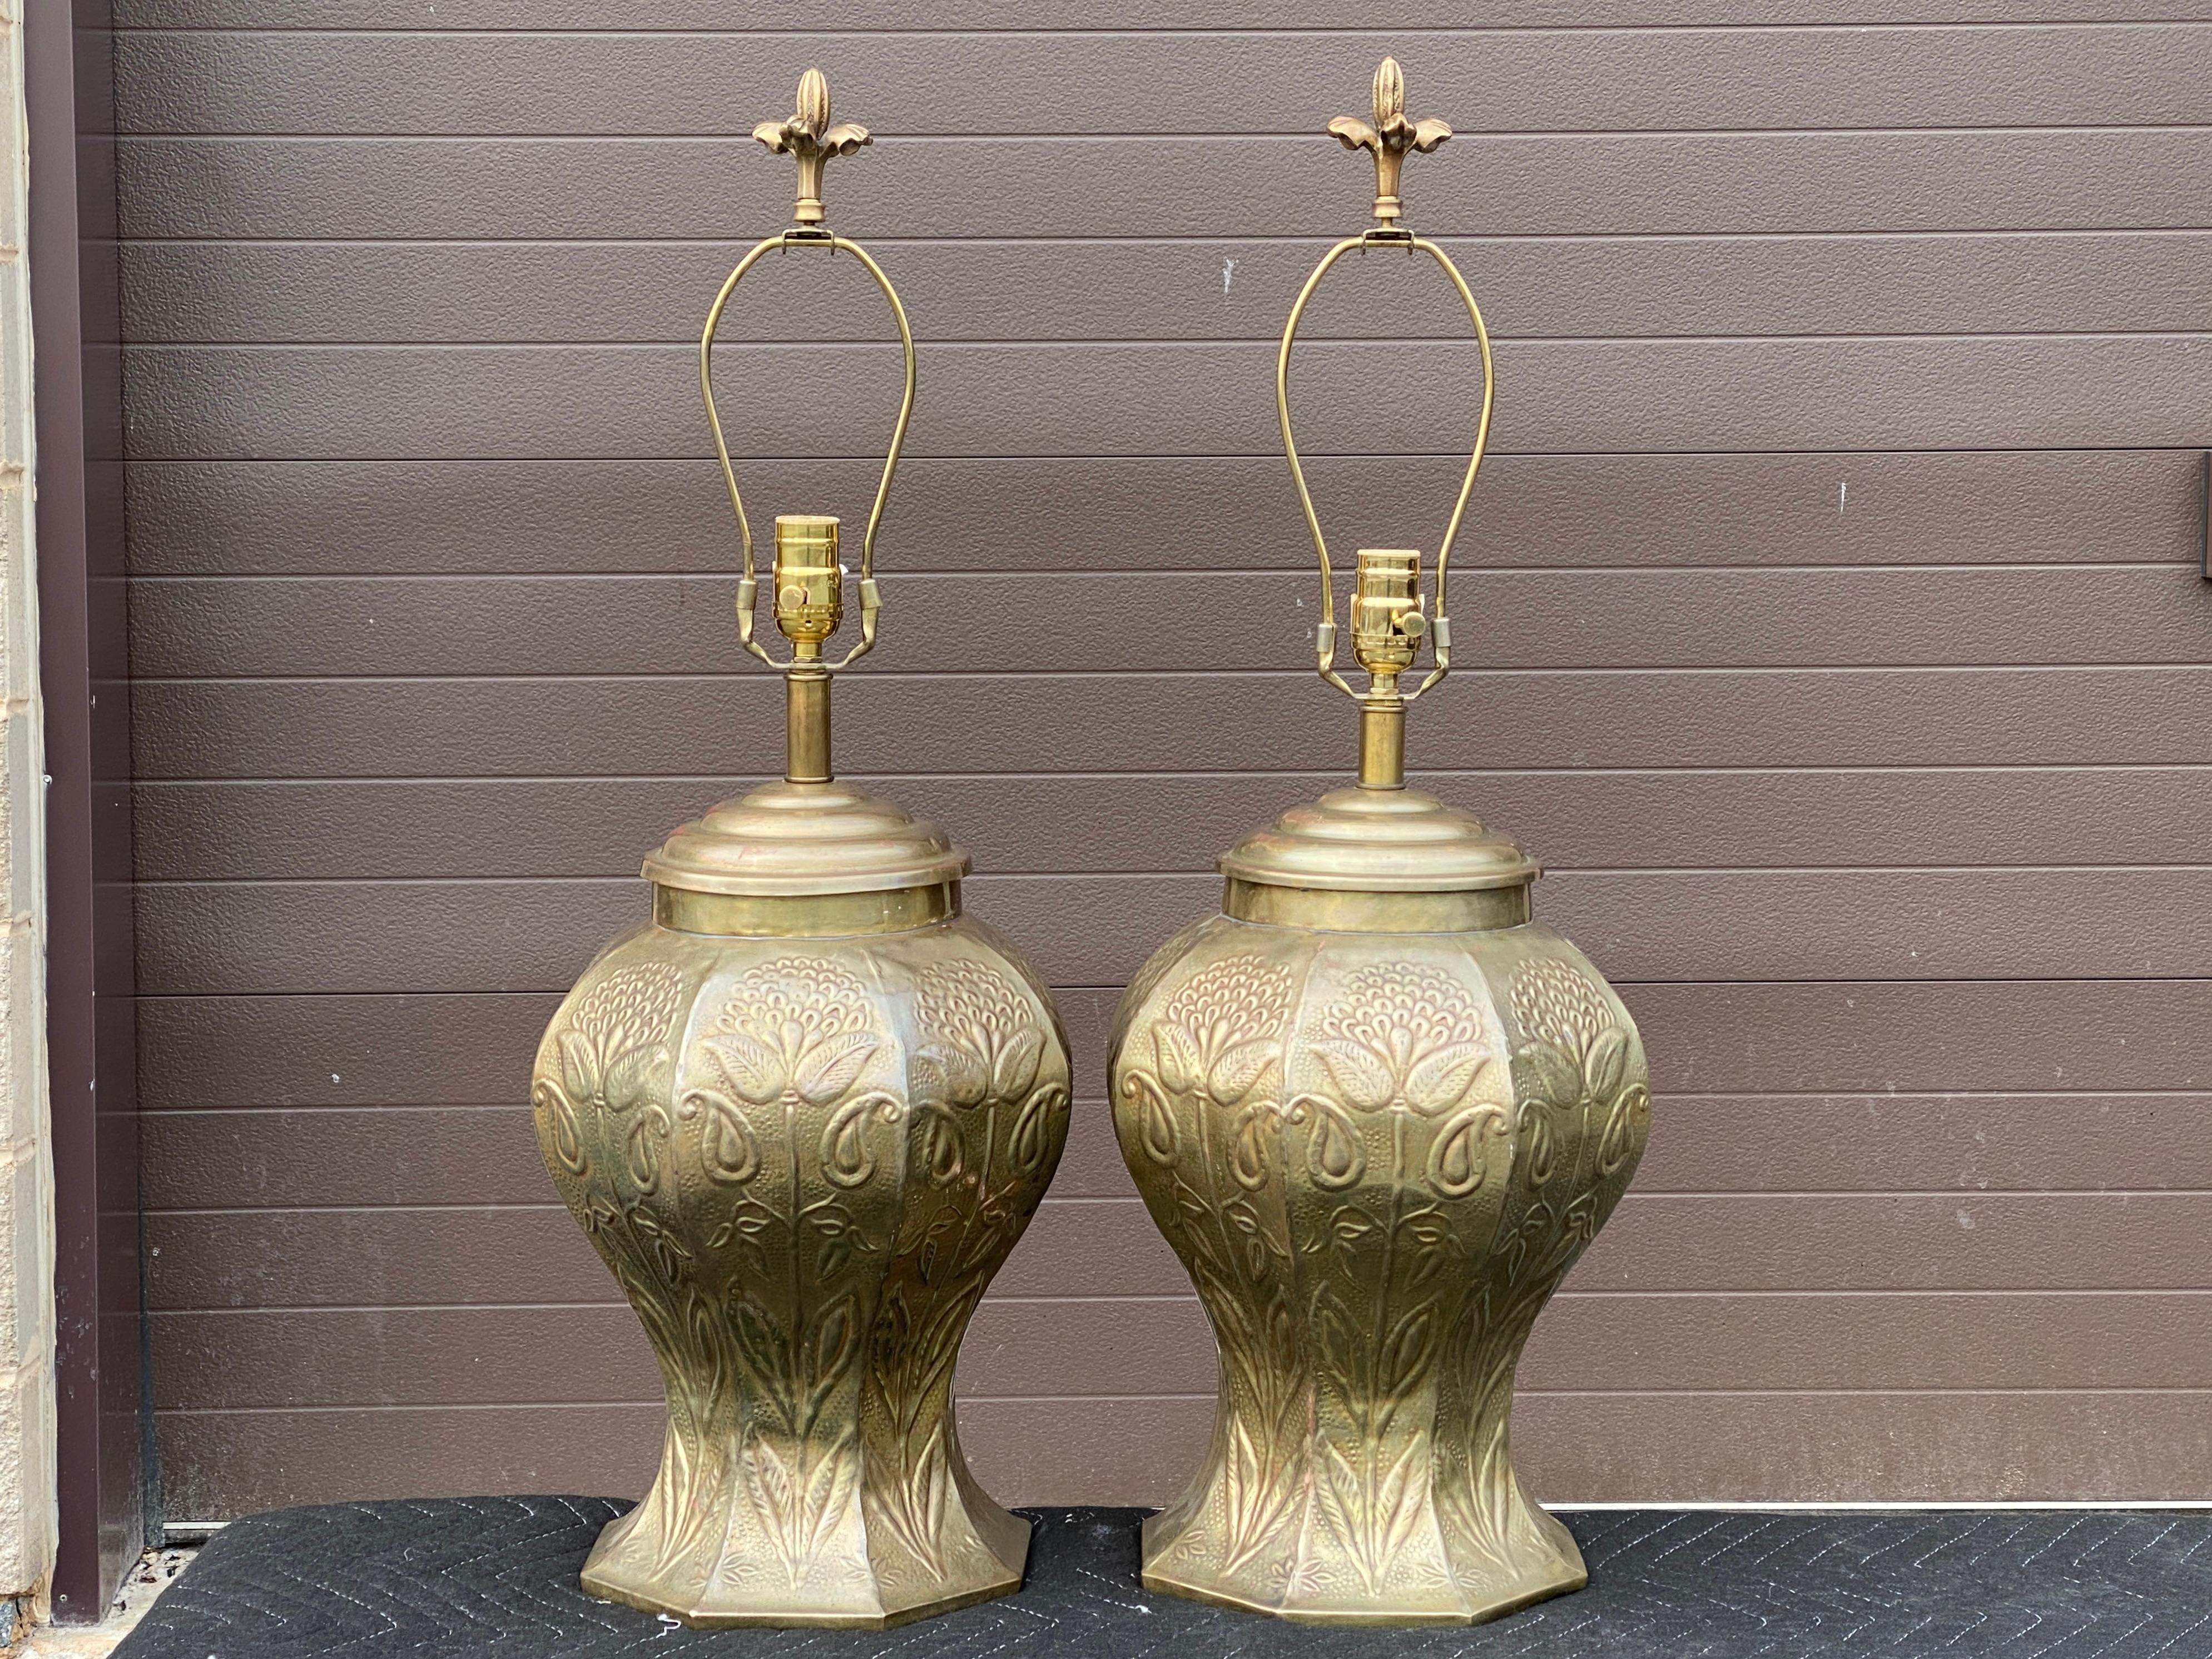 Vintage John Richard Hammered Brass Table Lamps With Floral Finials
20” at to top of bulb socket 
Base 8.75”
3” heavy brass finials